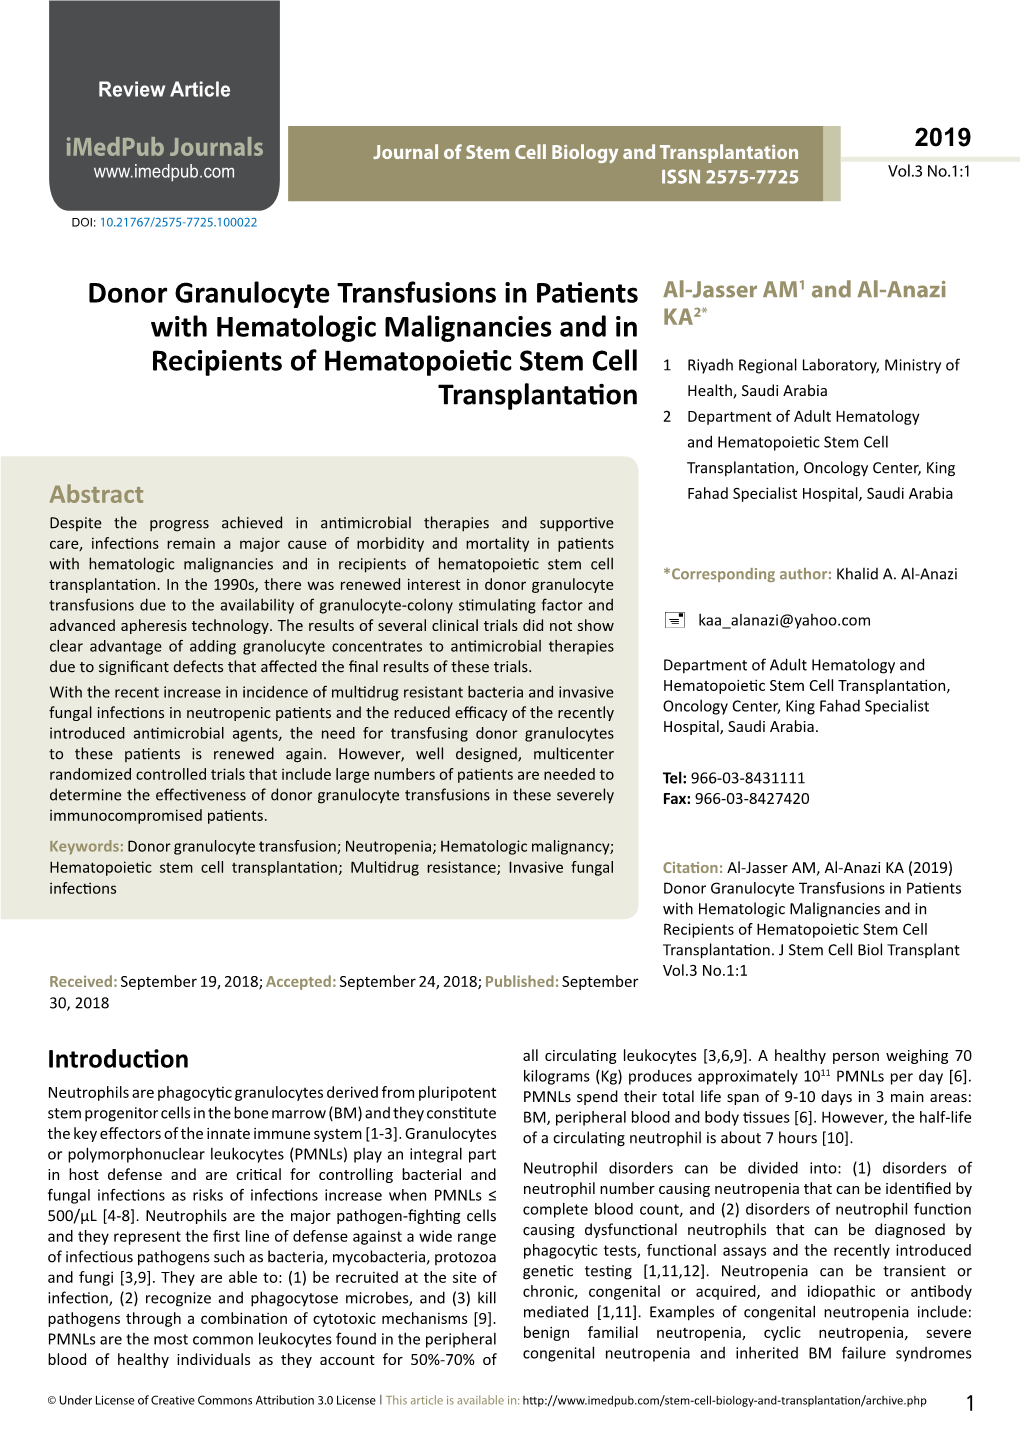 Donor Granulocyte Transfusions in Patients with Hematologic Malignancies and in Recipients of Hematopoietic Stem Cell Transplantation